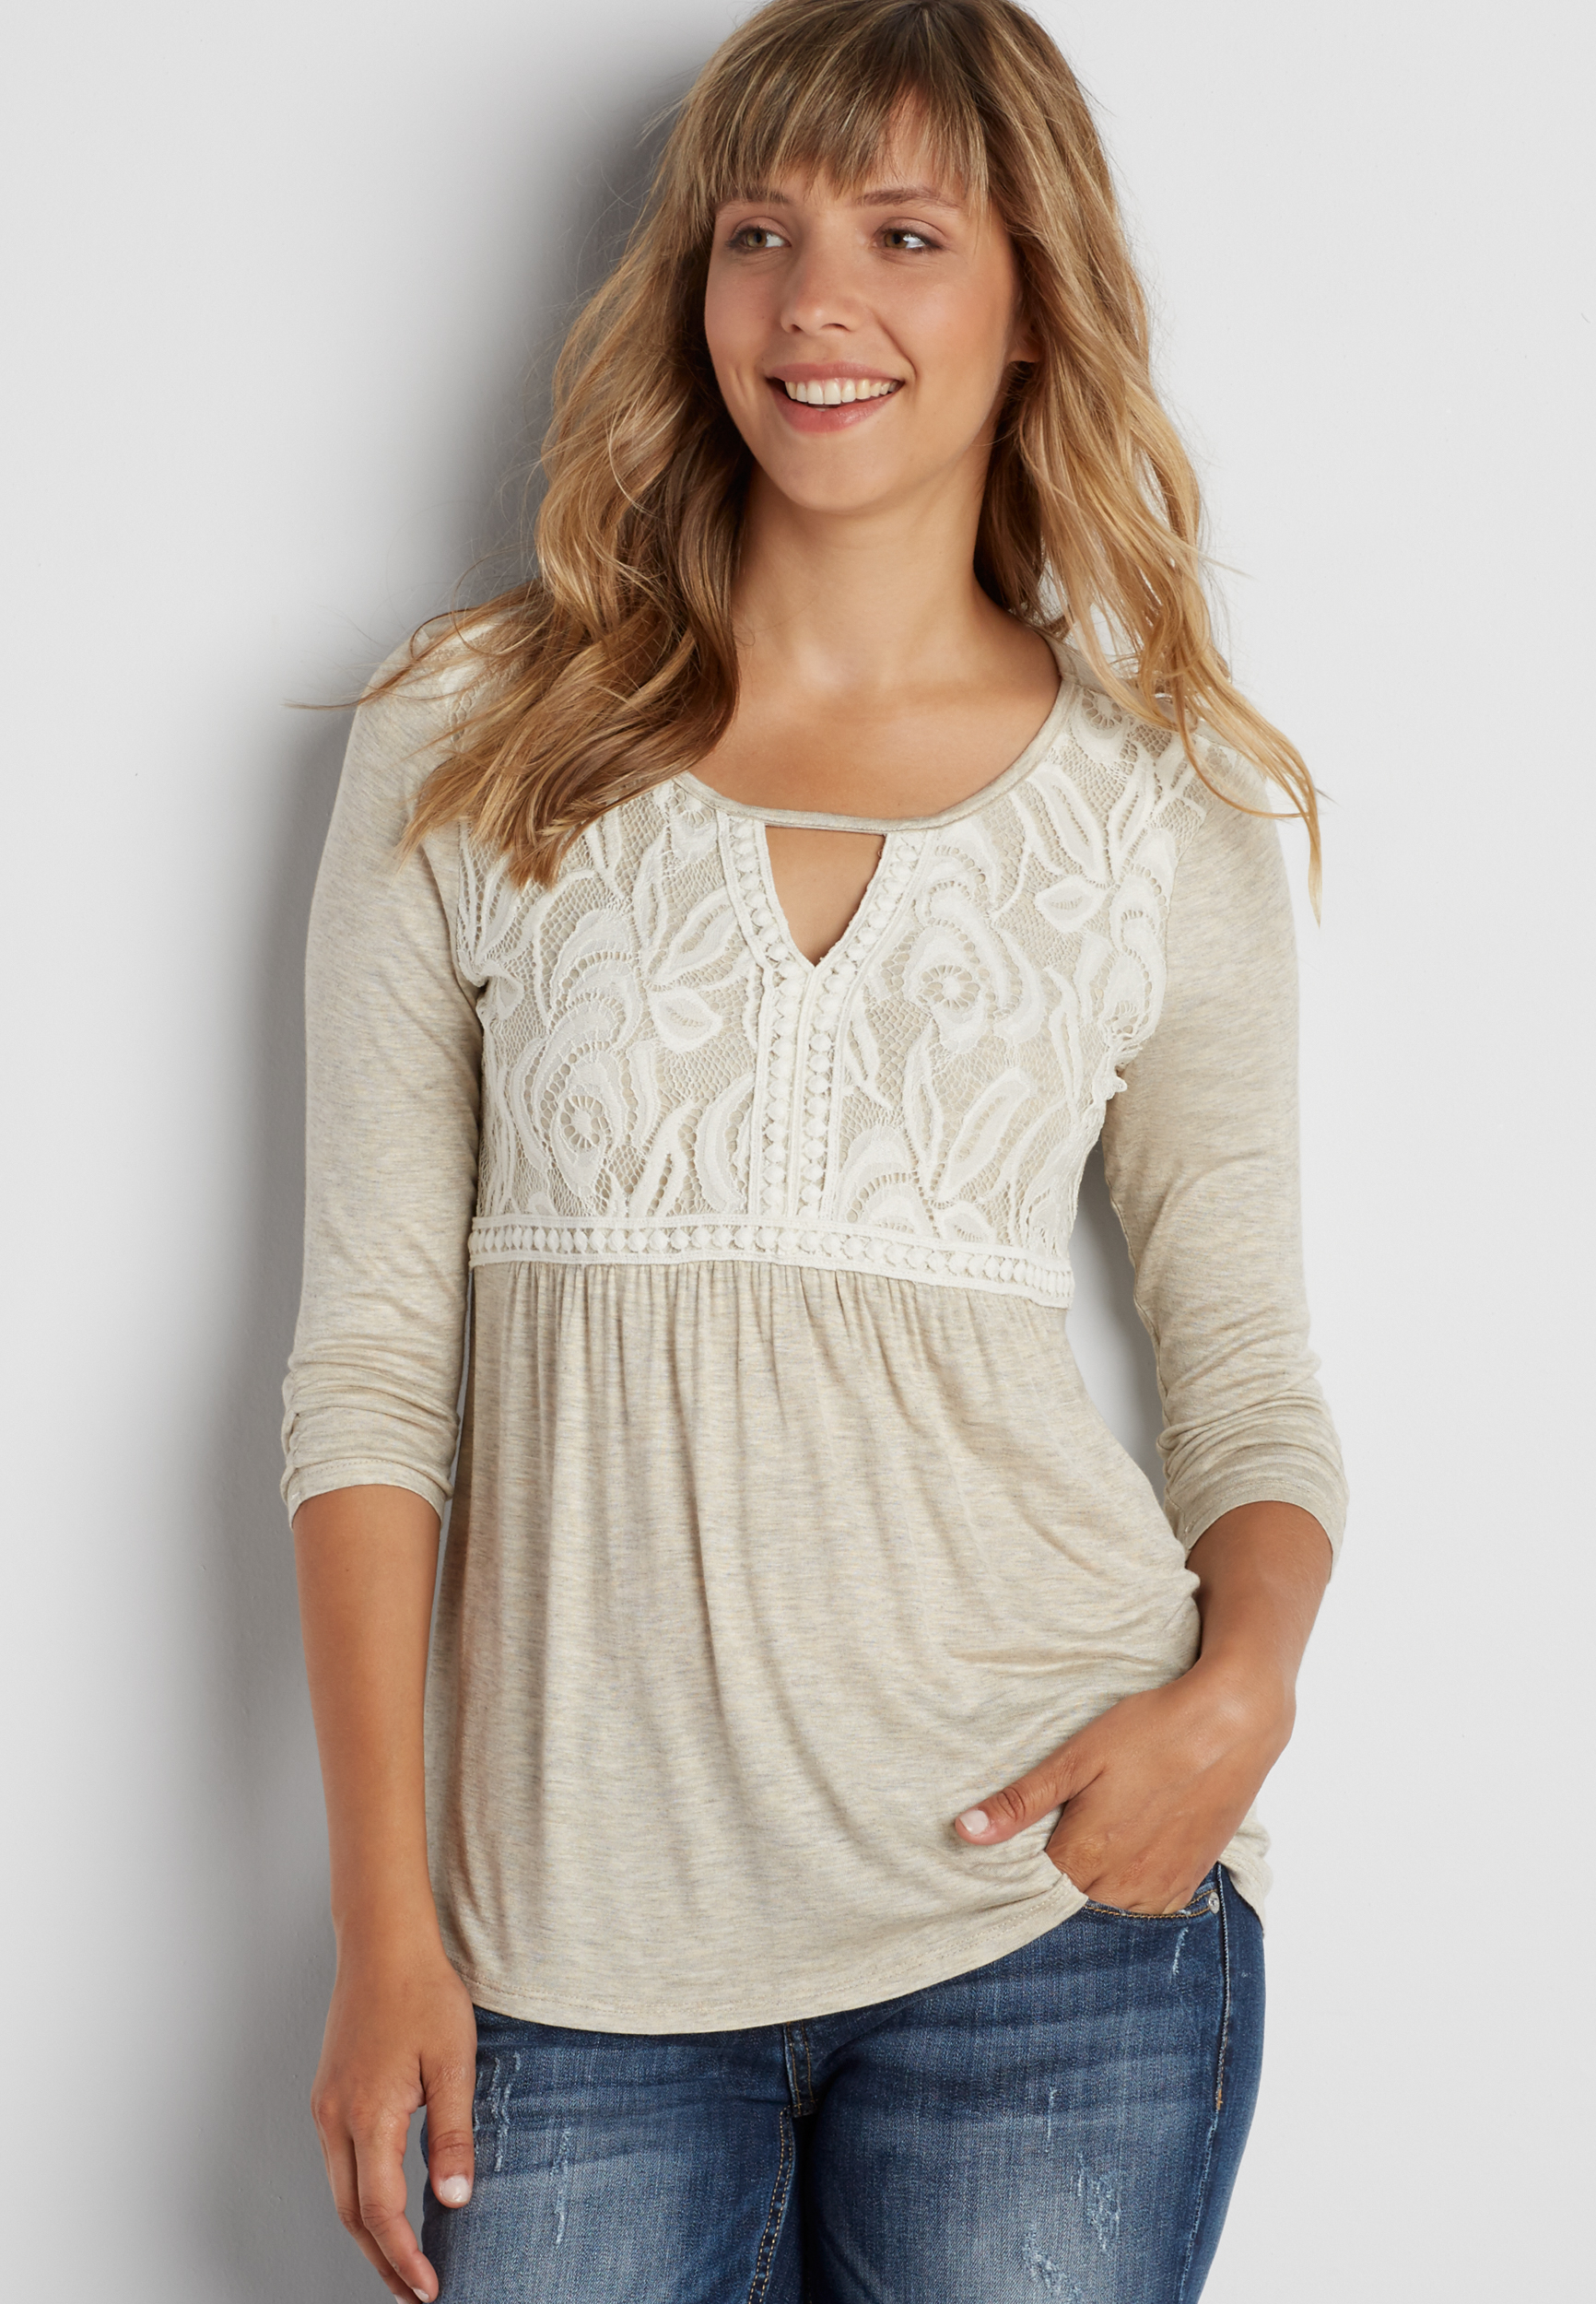 tee with lace overlay and peek-a-boo neckline | maurices